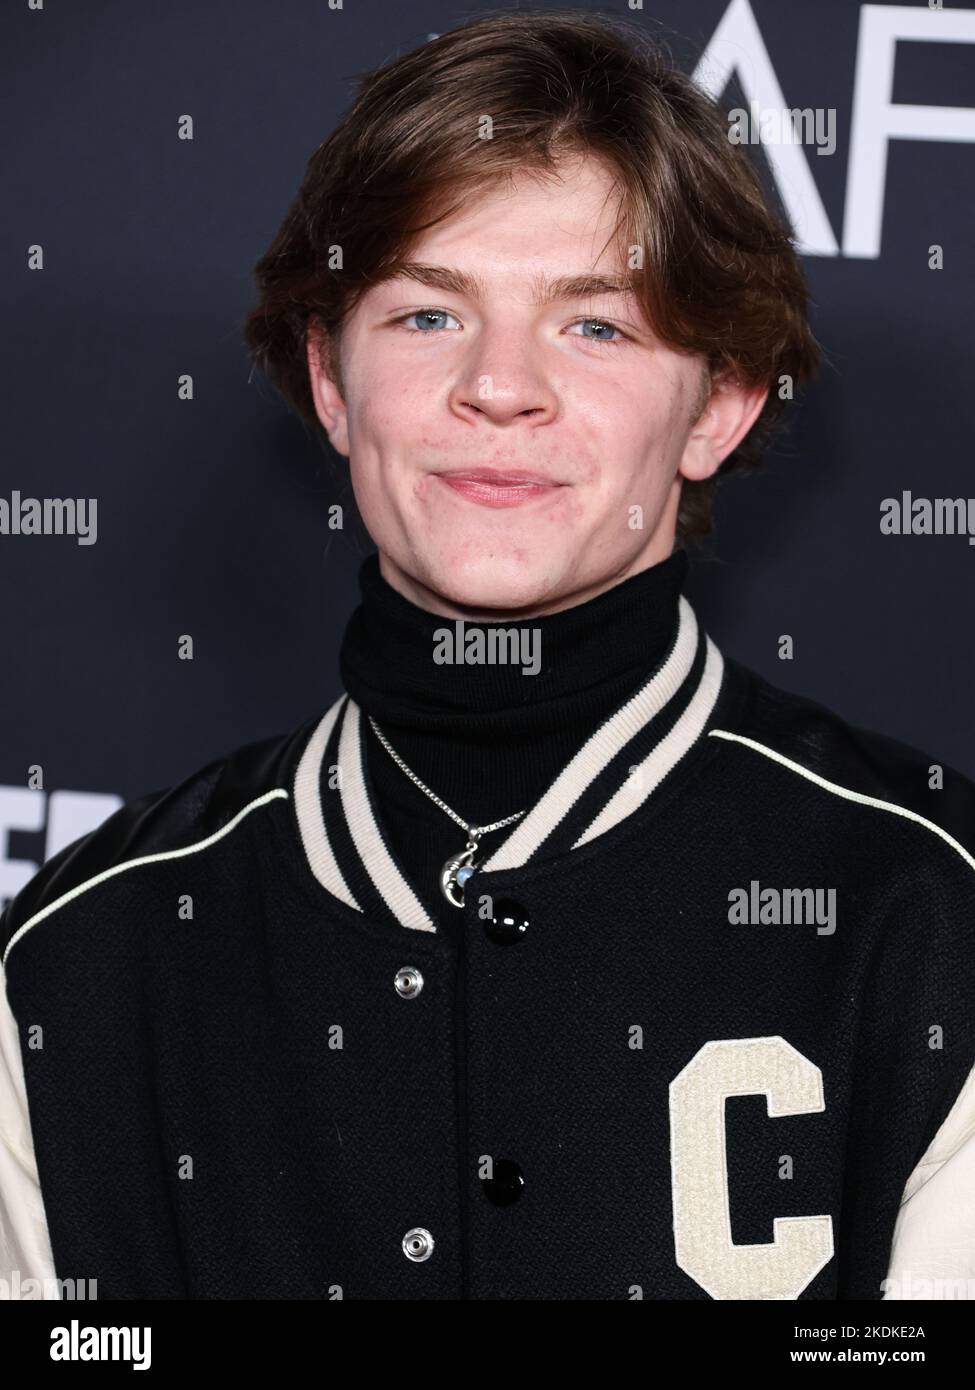 HOLLYWOOD, LOS ANGELES, KALIFORNIEN, USA - 06. NOVEMBER: Oakes Fegley kommt beim AFI Fest 2022 an - Abschlussnacht Special Screening of Universal Pictures' 'The Fabelmans', das am 6. November 2022 im TCL Chinese Theatre IMAX in Hollywood, Los Angeles, Kalifornien, USA, stattfand. (Foto von Xavier Collin/Image Press Agency) Stockfoto